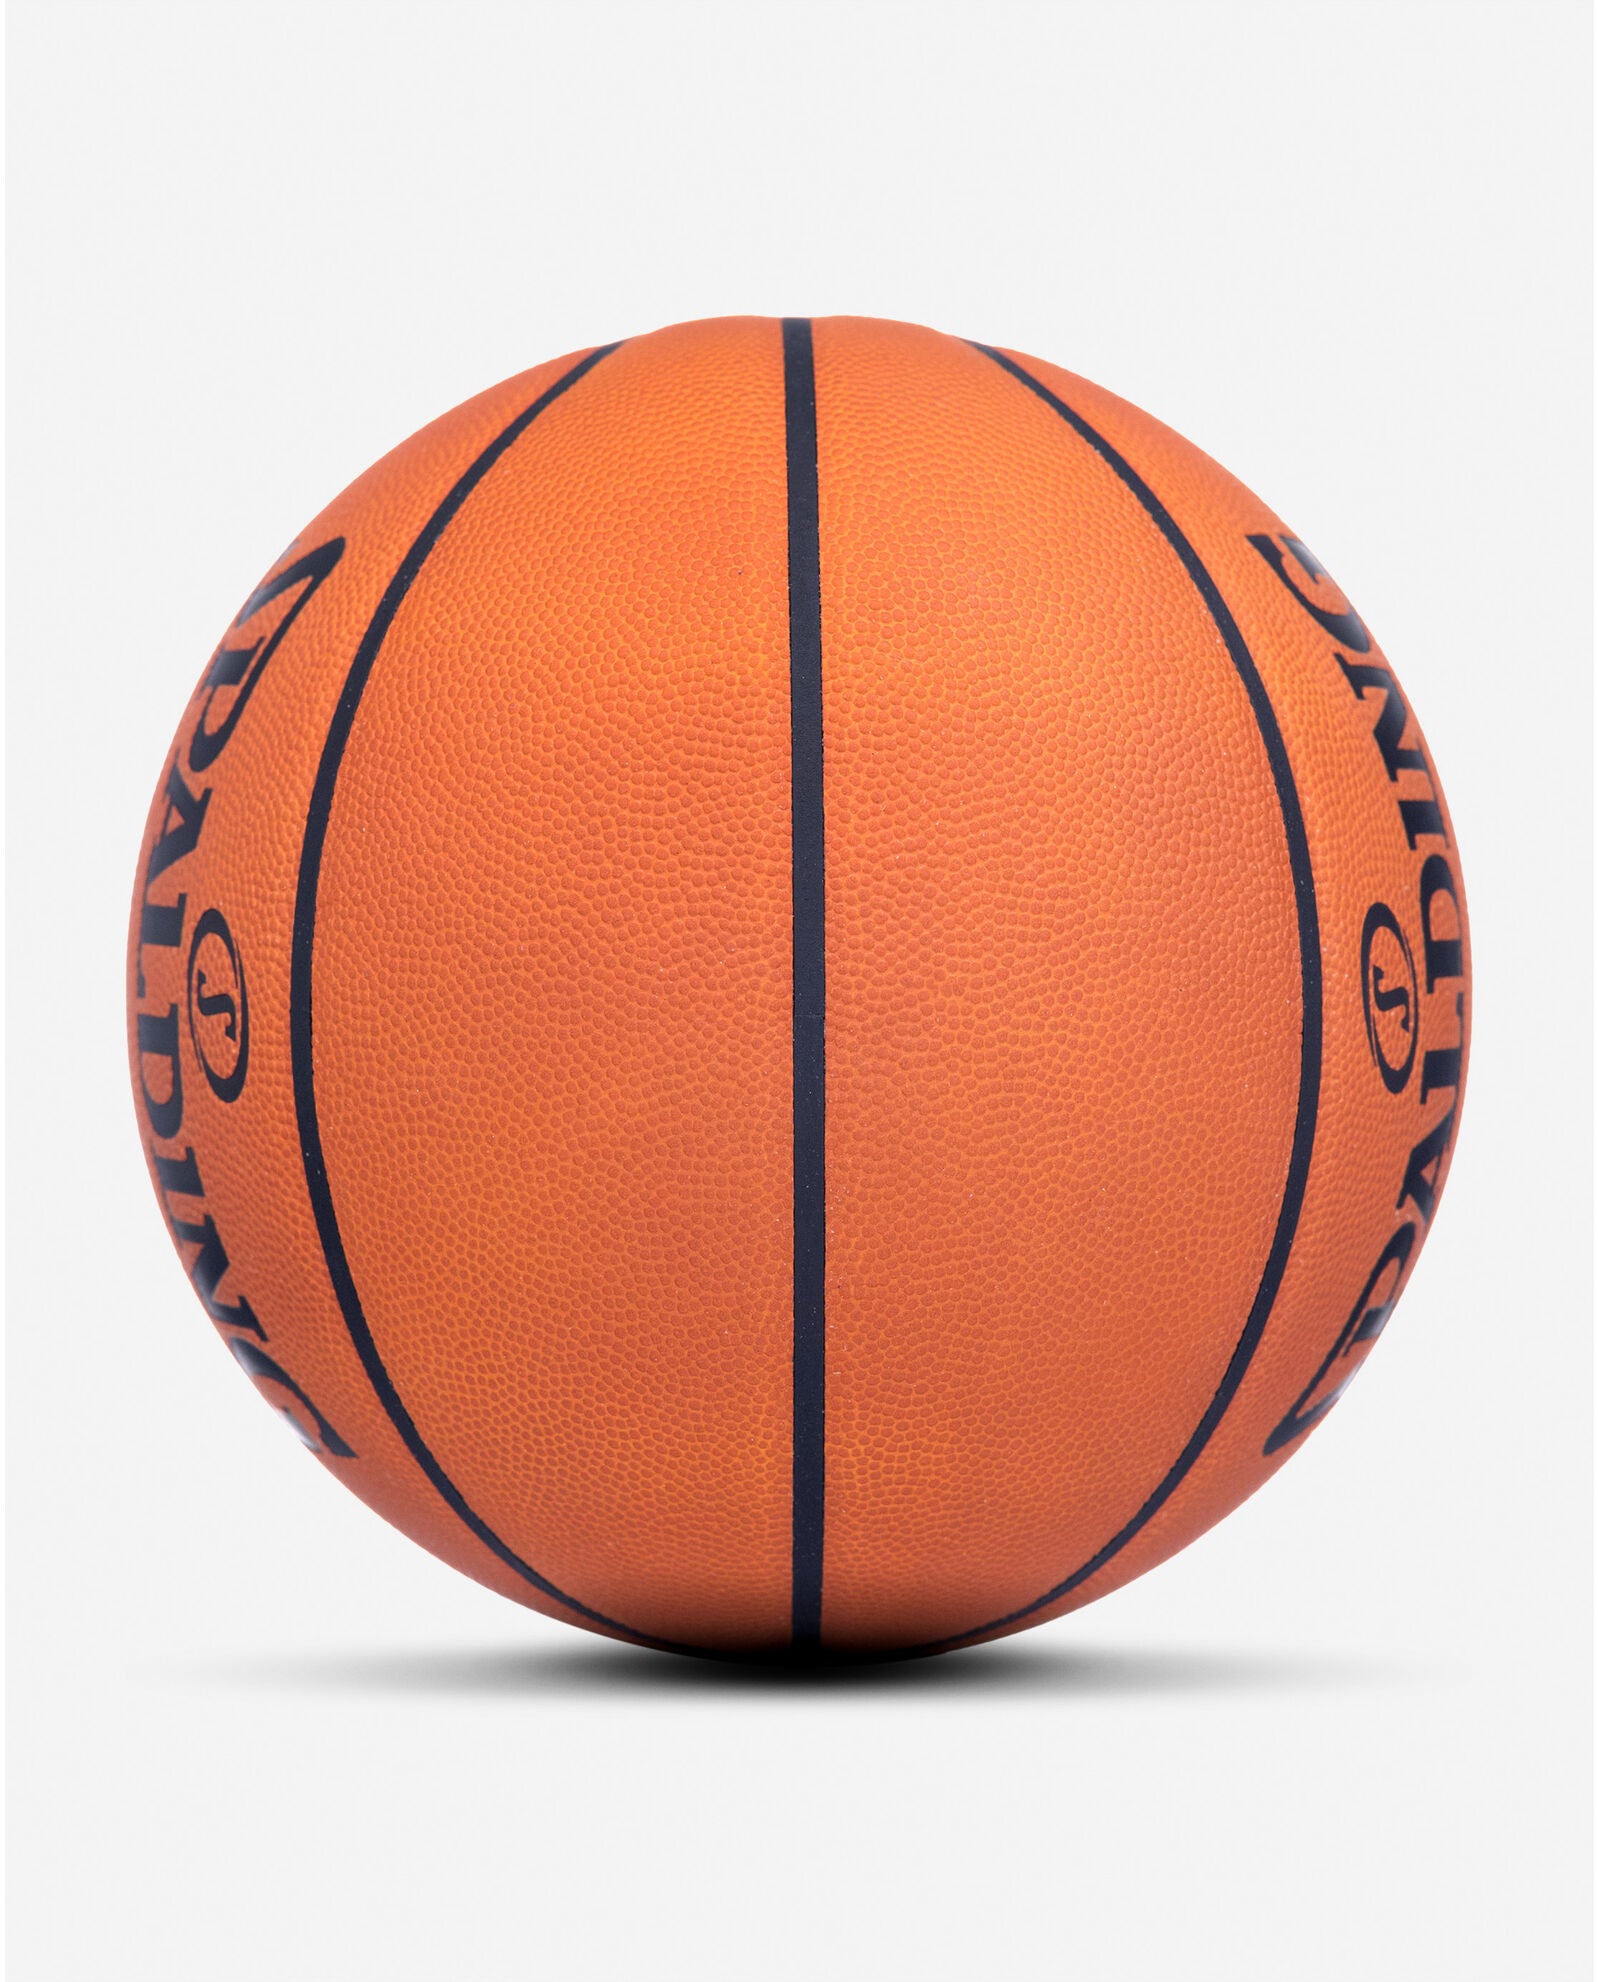 Spalding TF Model M Official Leather Indoor Game Basketball